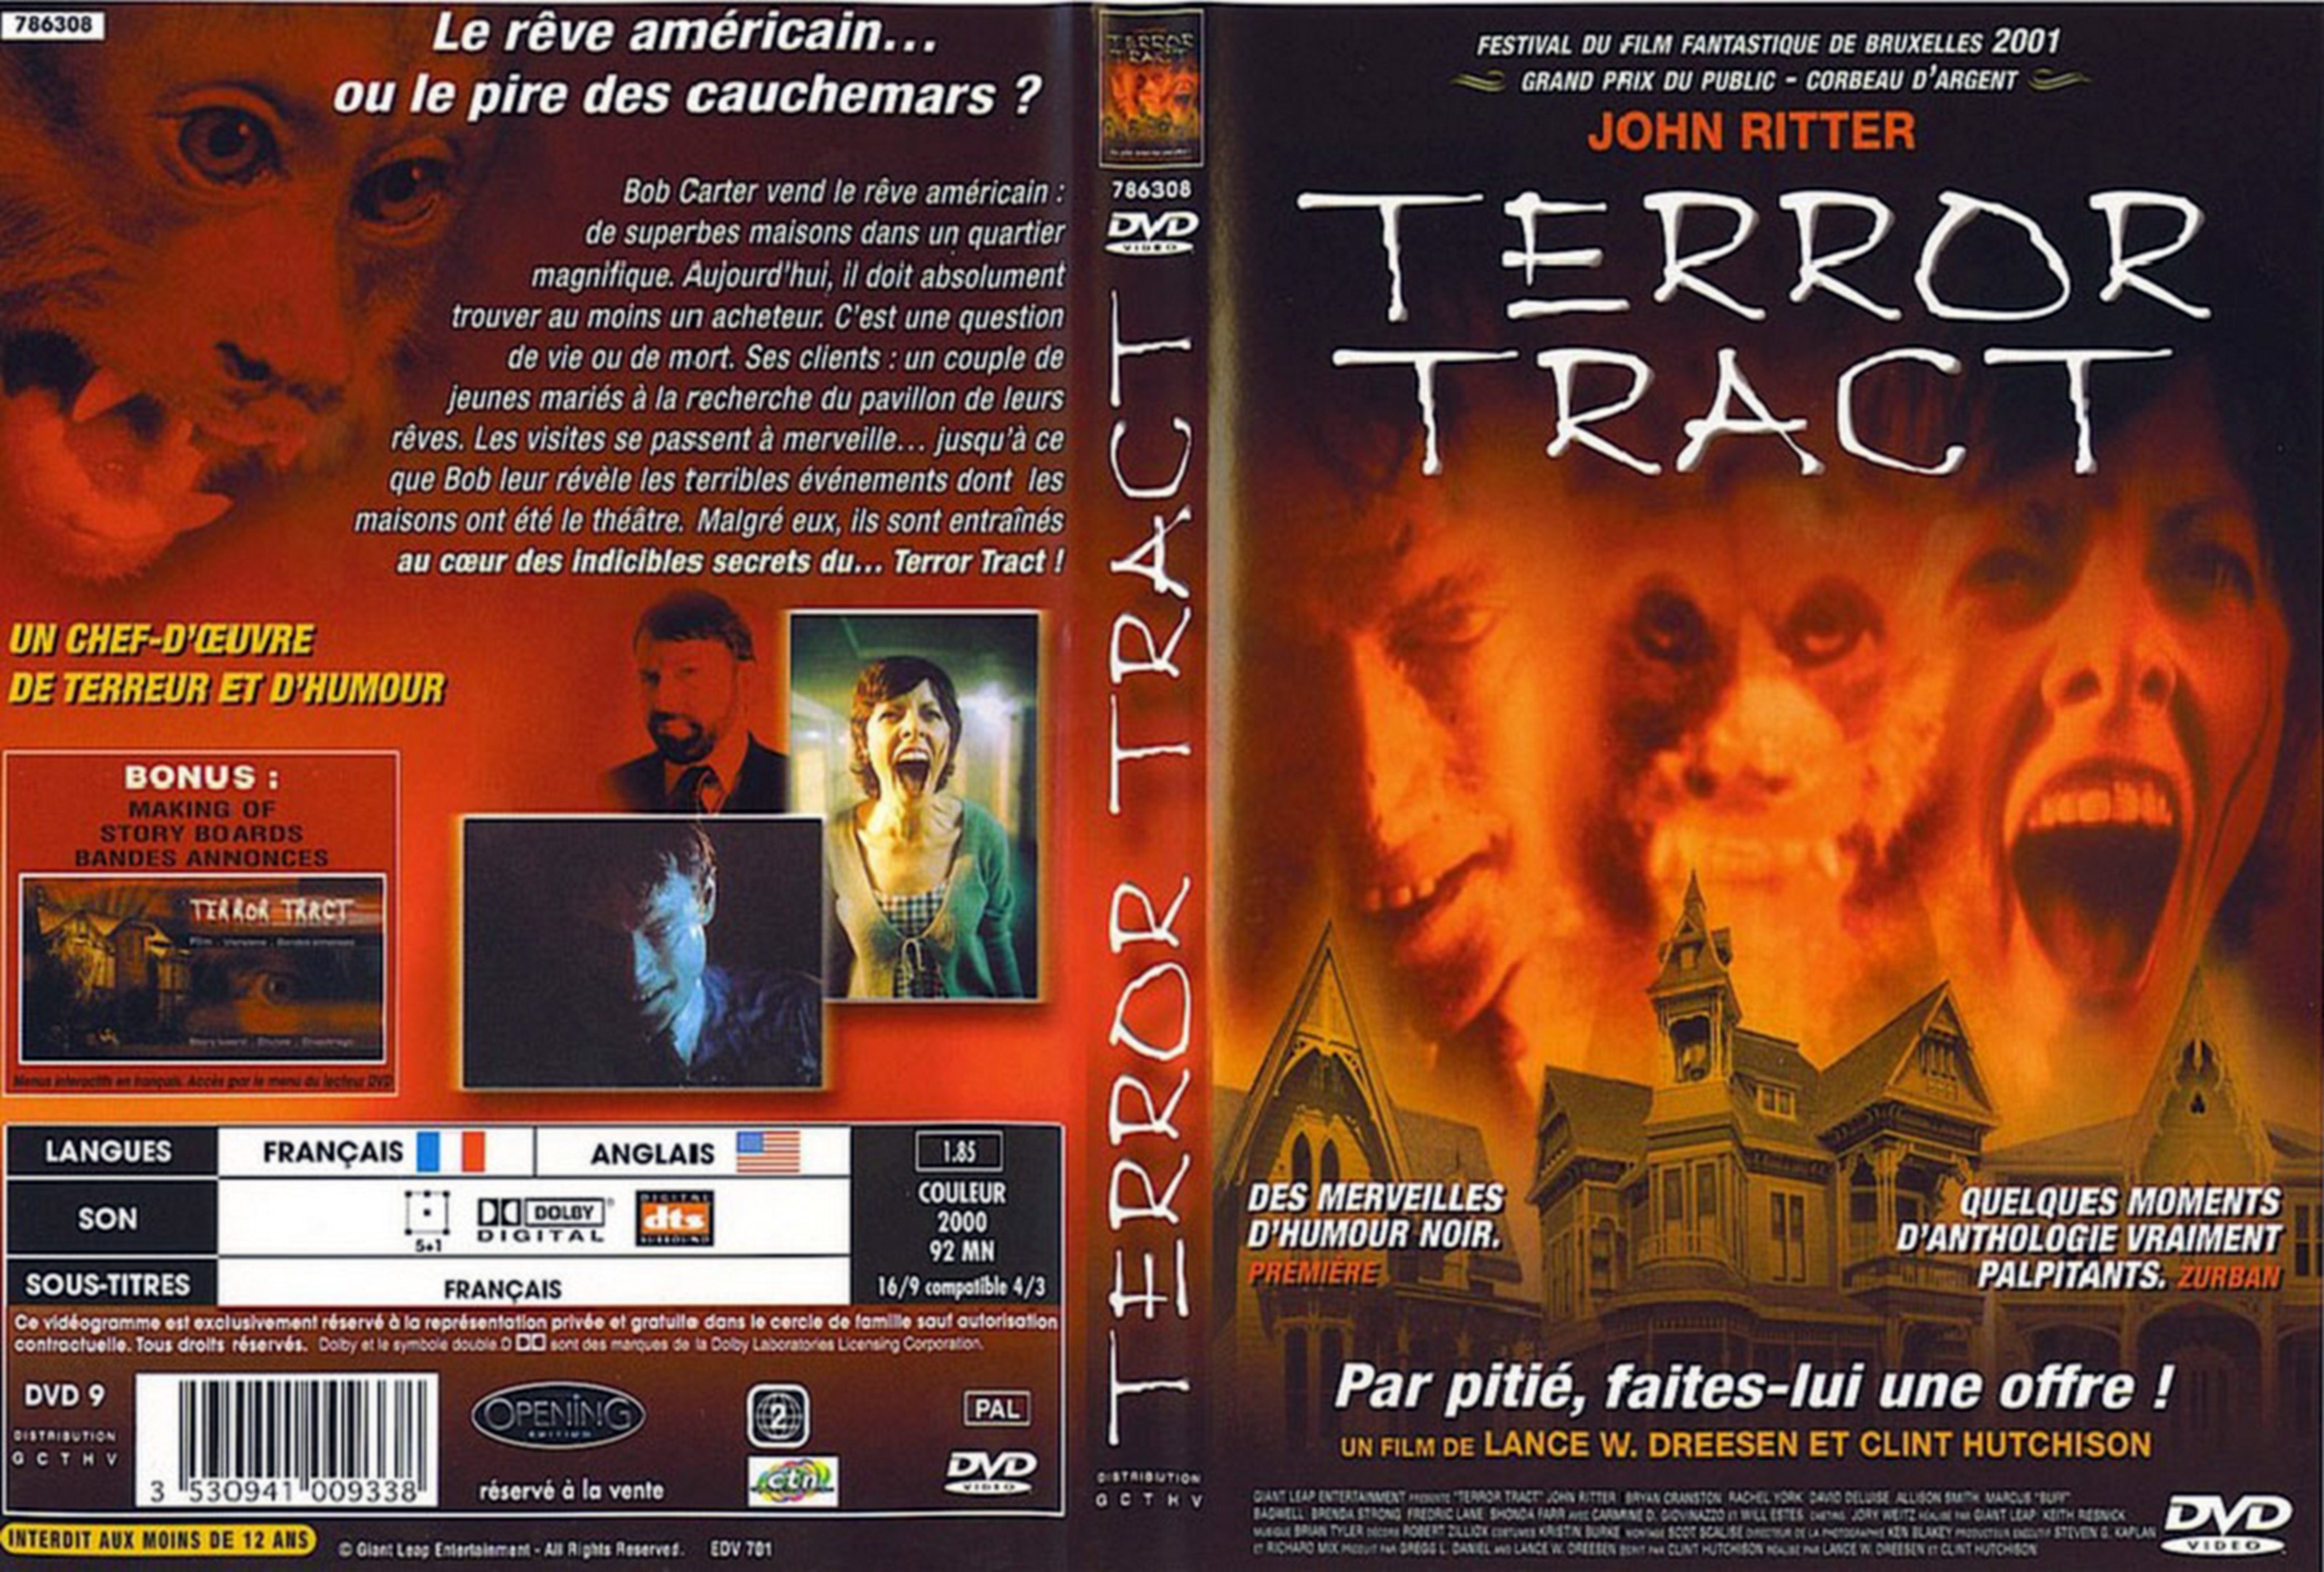 Jaquette DVD Terror tract